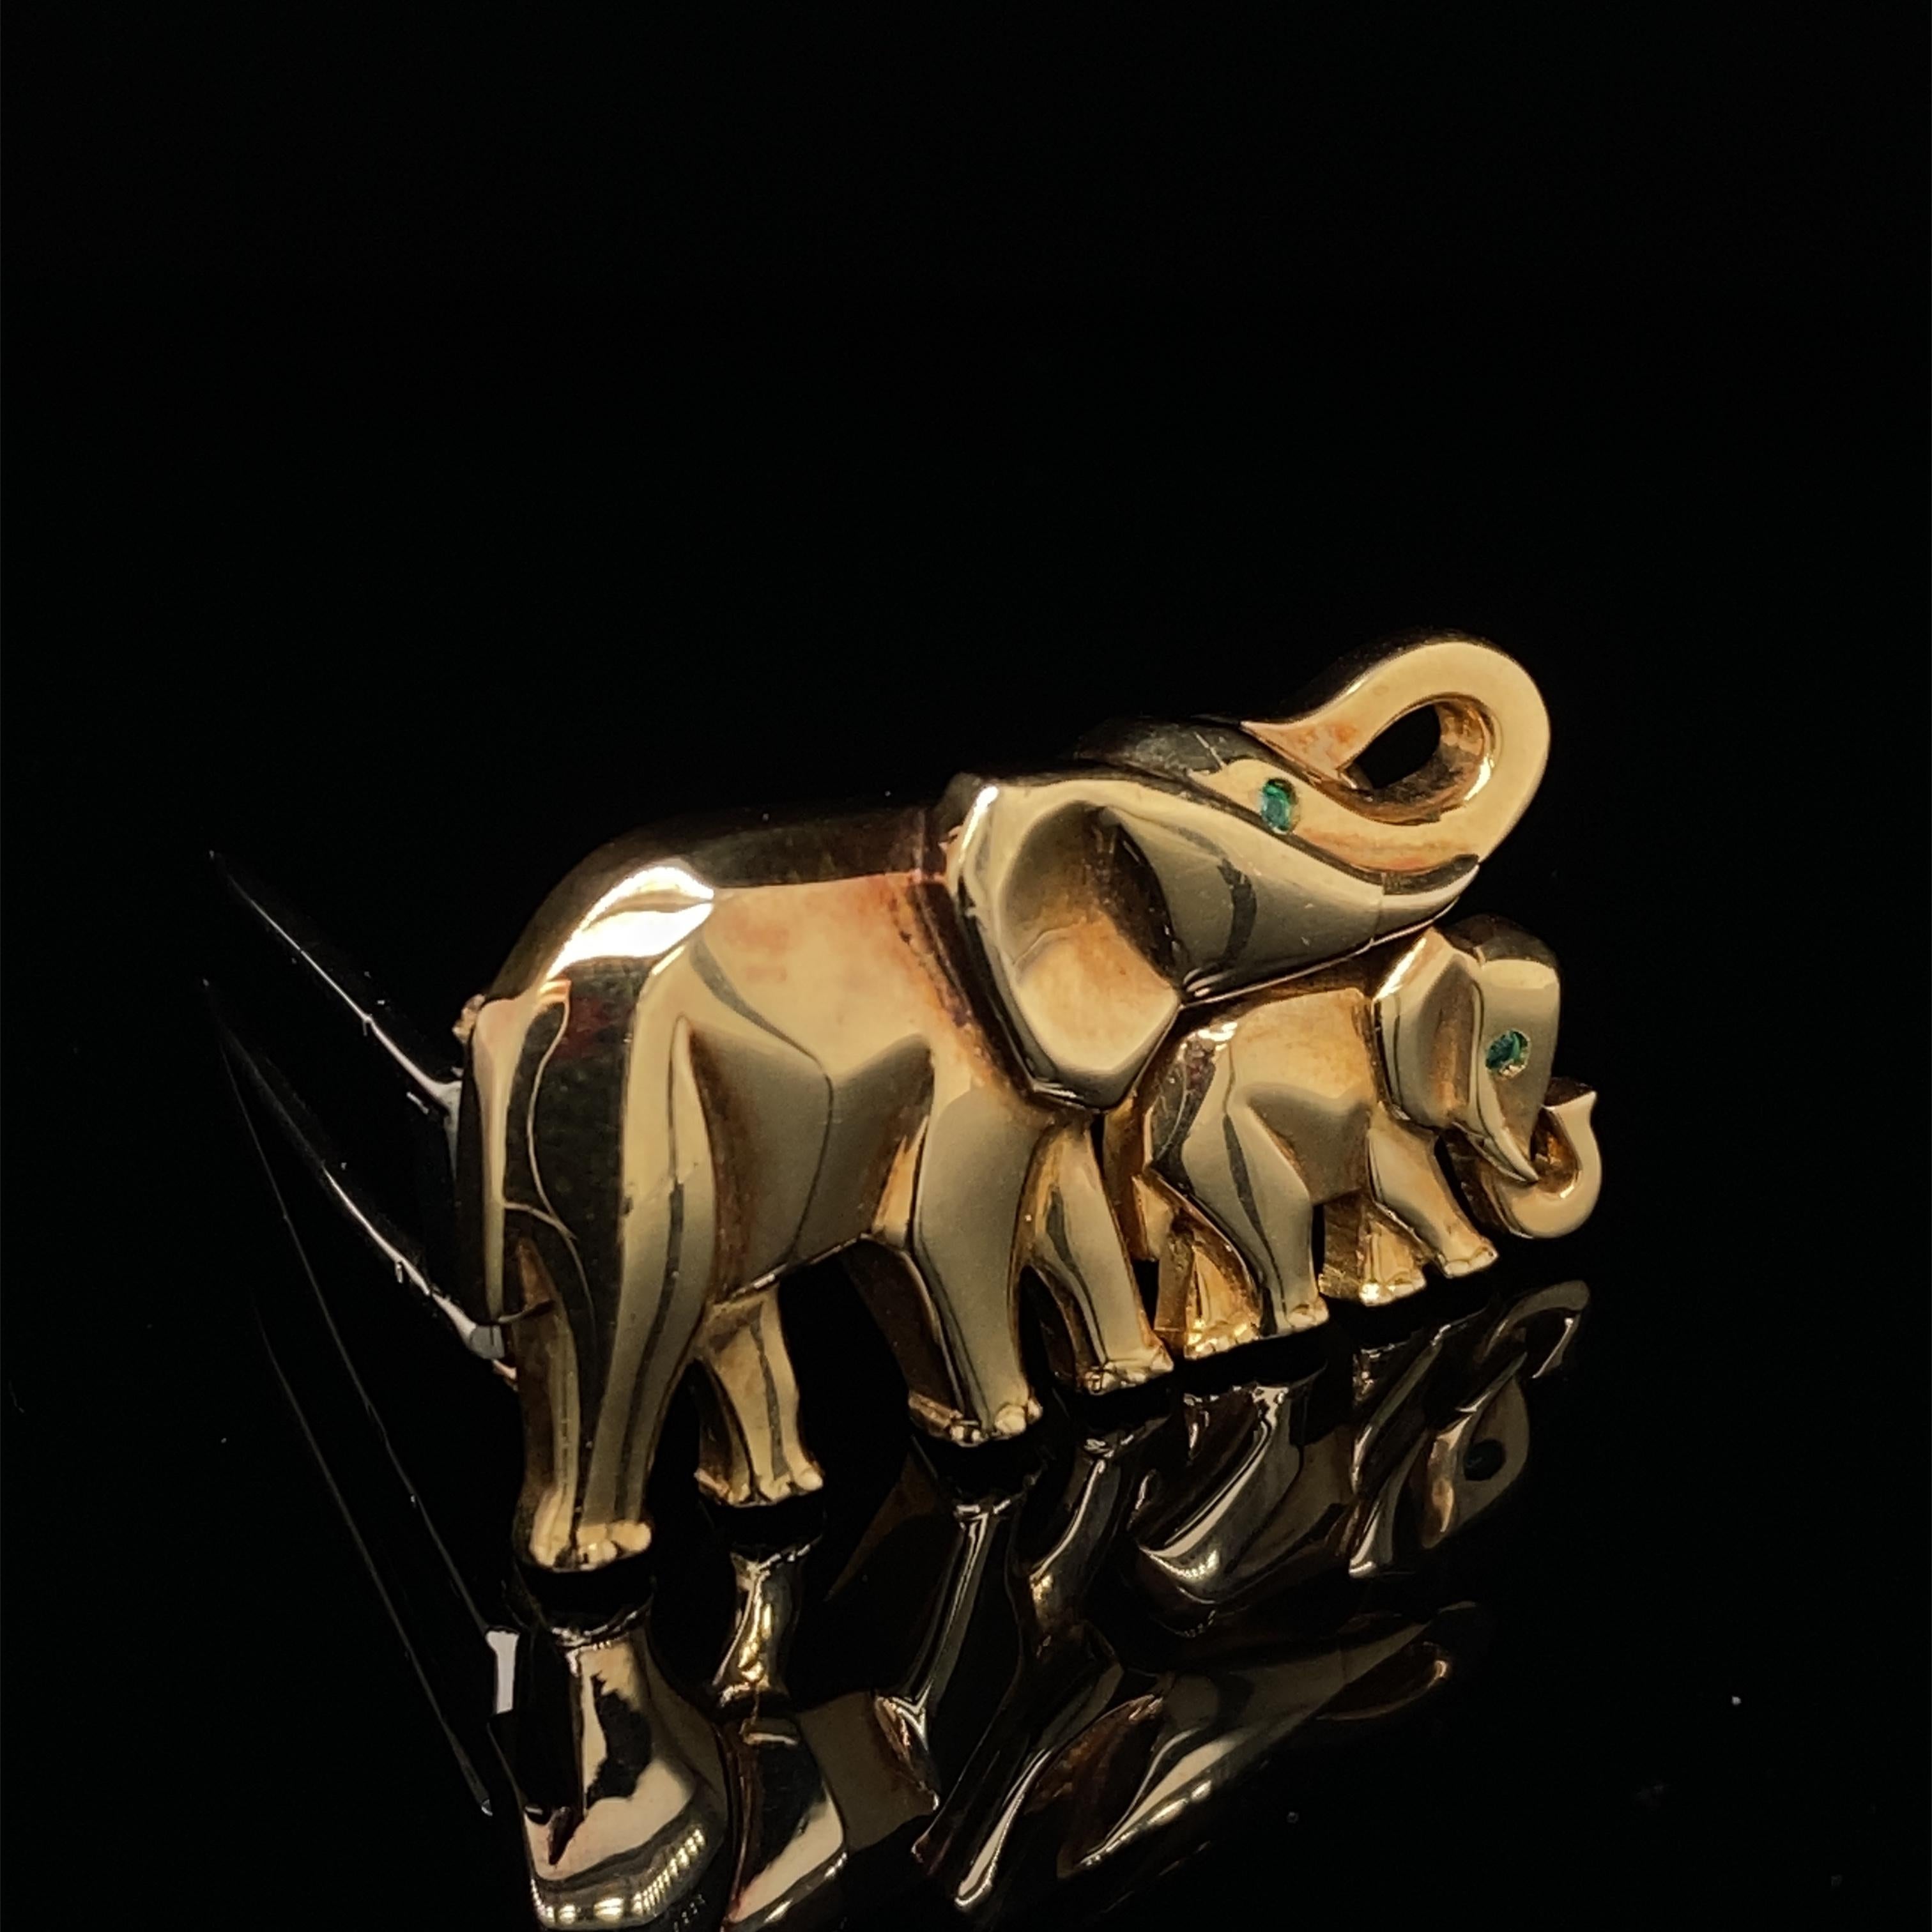 A Cartier elephant and calf emerald set brooch in 18 karat yellow gold.

A fun elephant brooch in 18 karat yellow gold by Cartier, this is a must have for all elephant and indeed animal lovers!

This charming brooch is realistically modeled in